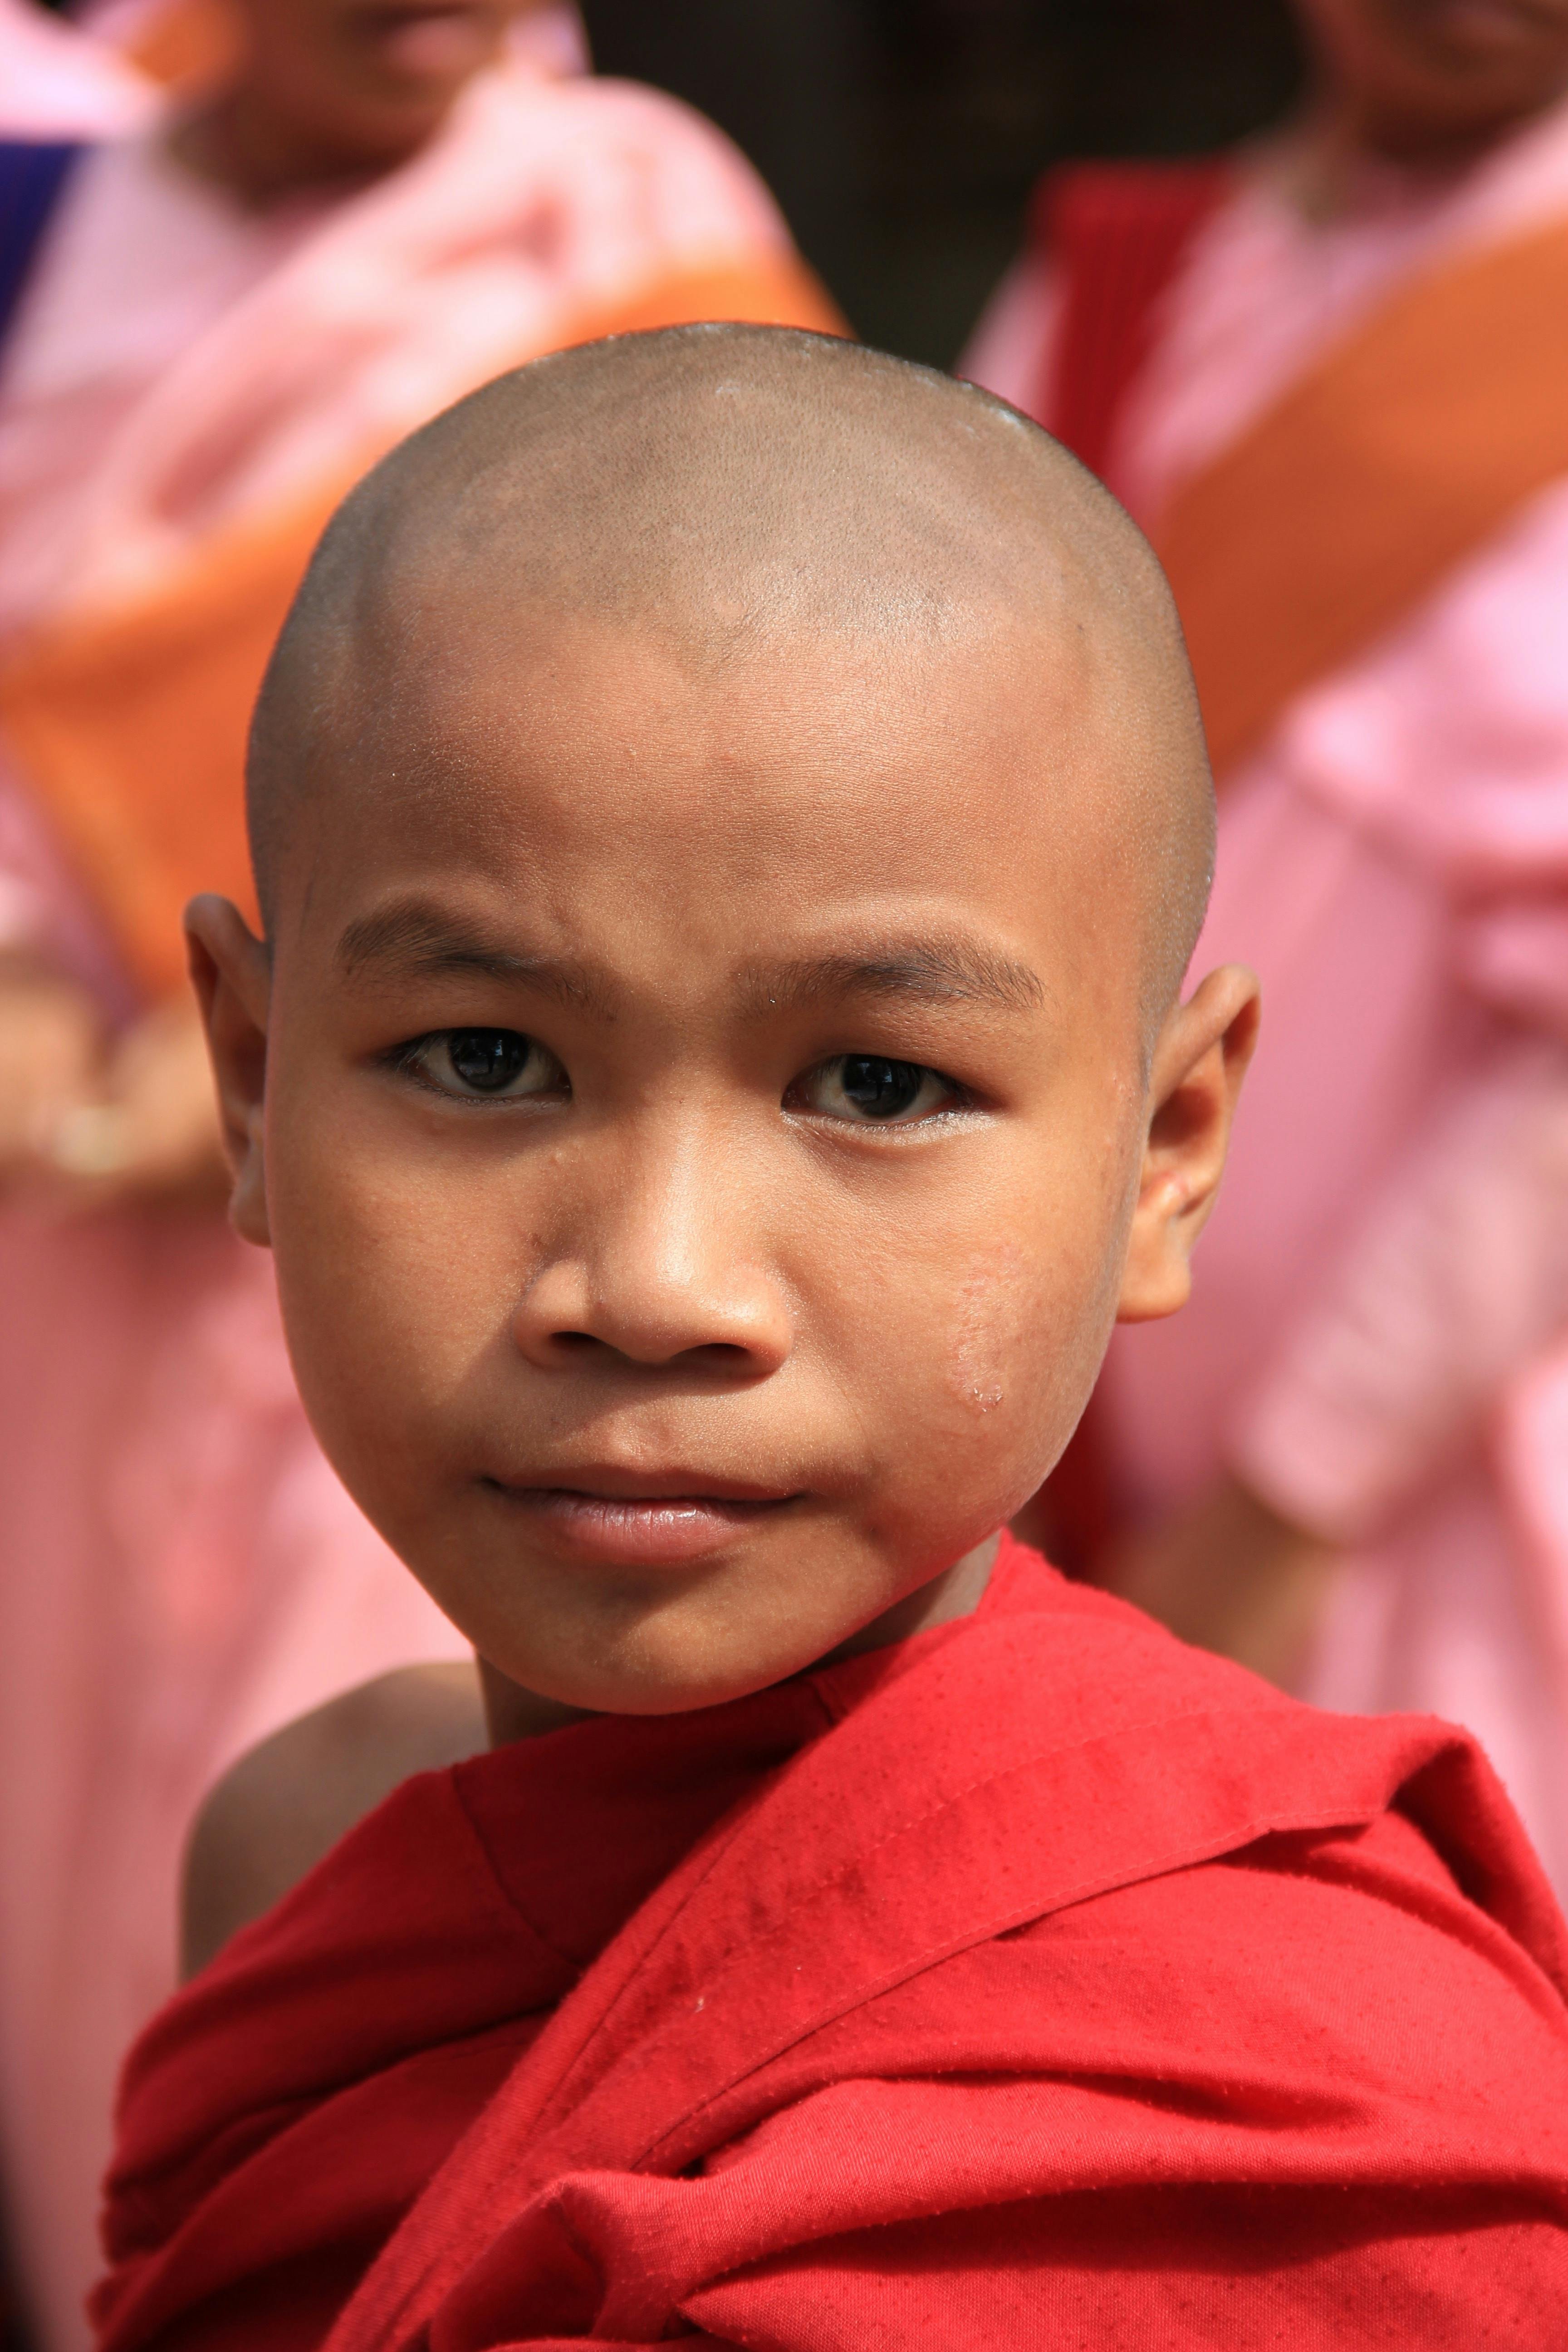 Monk Photos, Download The BEST Free Monk Stock Photos & HD Images